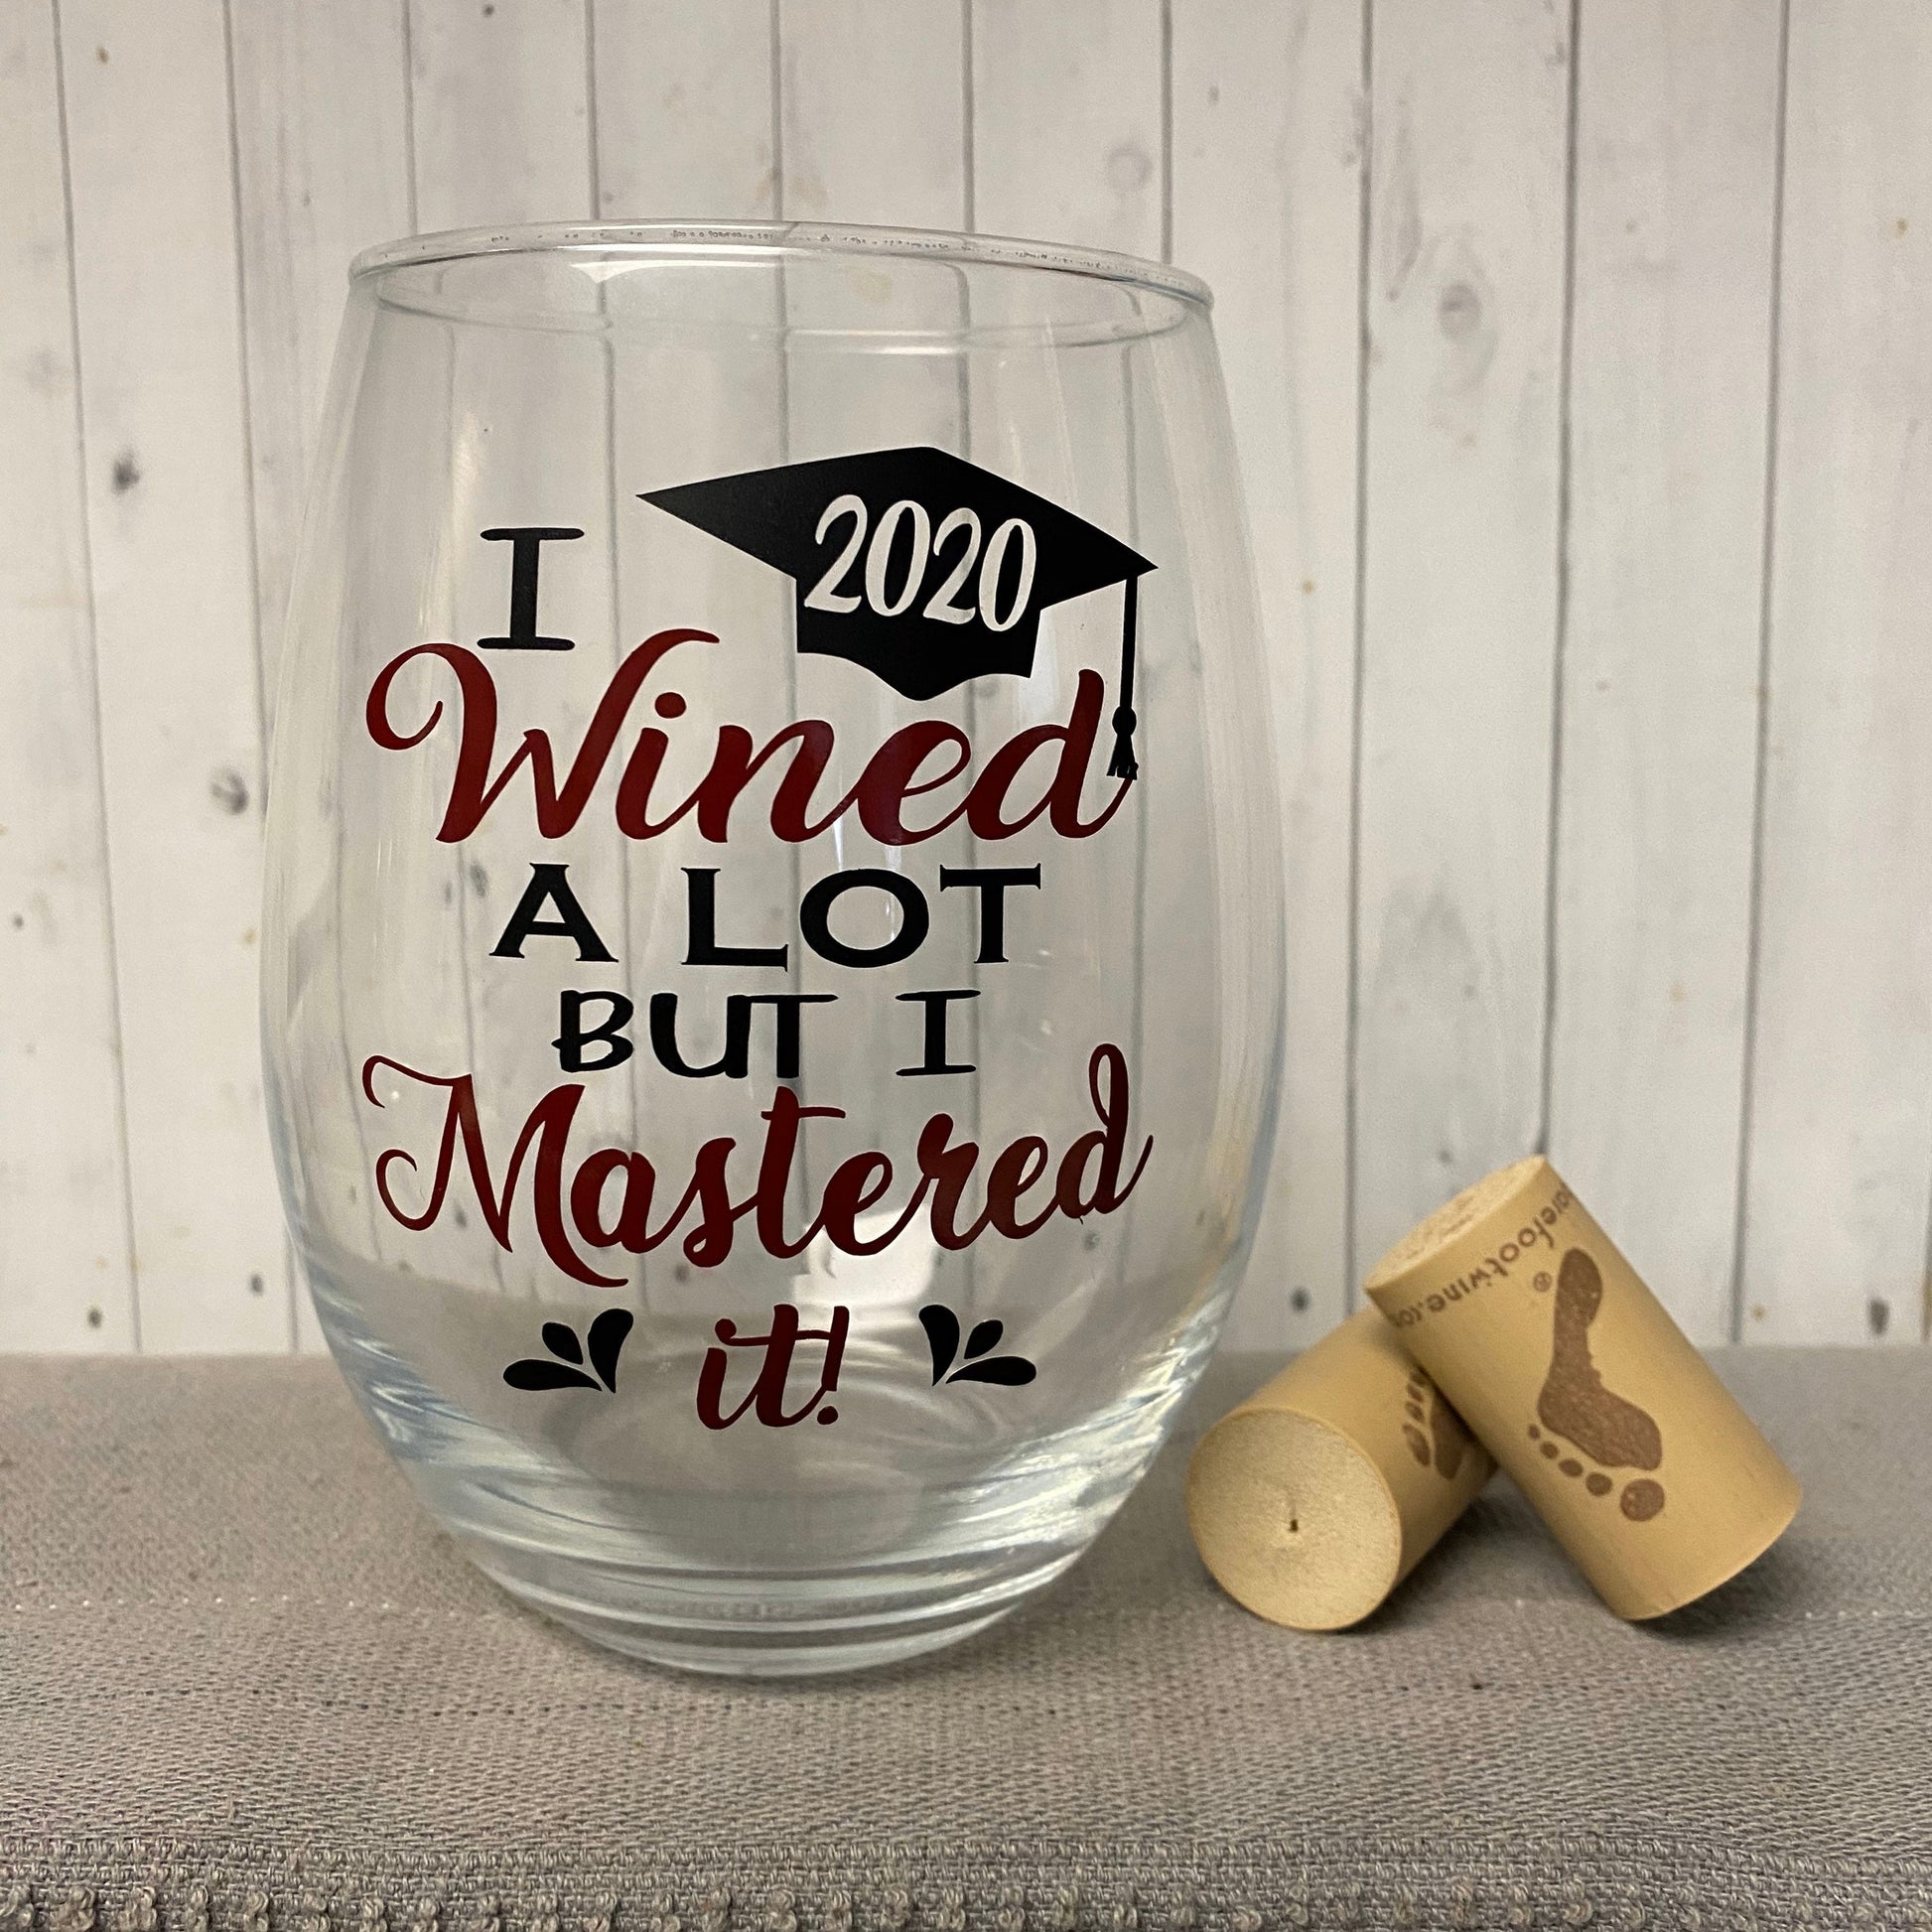 I wined a lot but I mastered it wine glass, college graduation gift, funny graduation gift, personalized grad gift, class of 2021